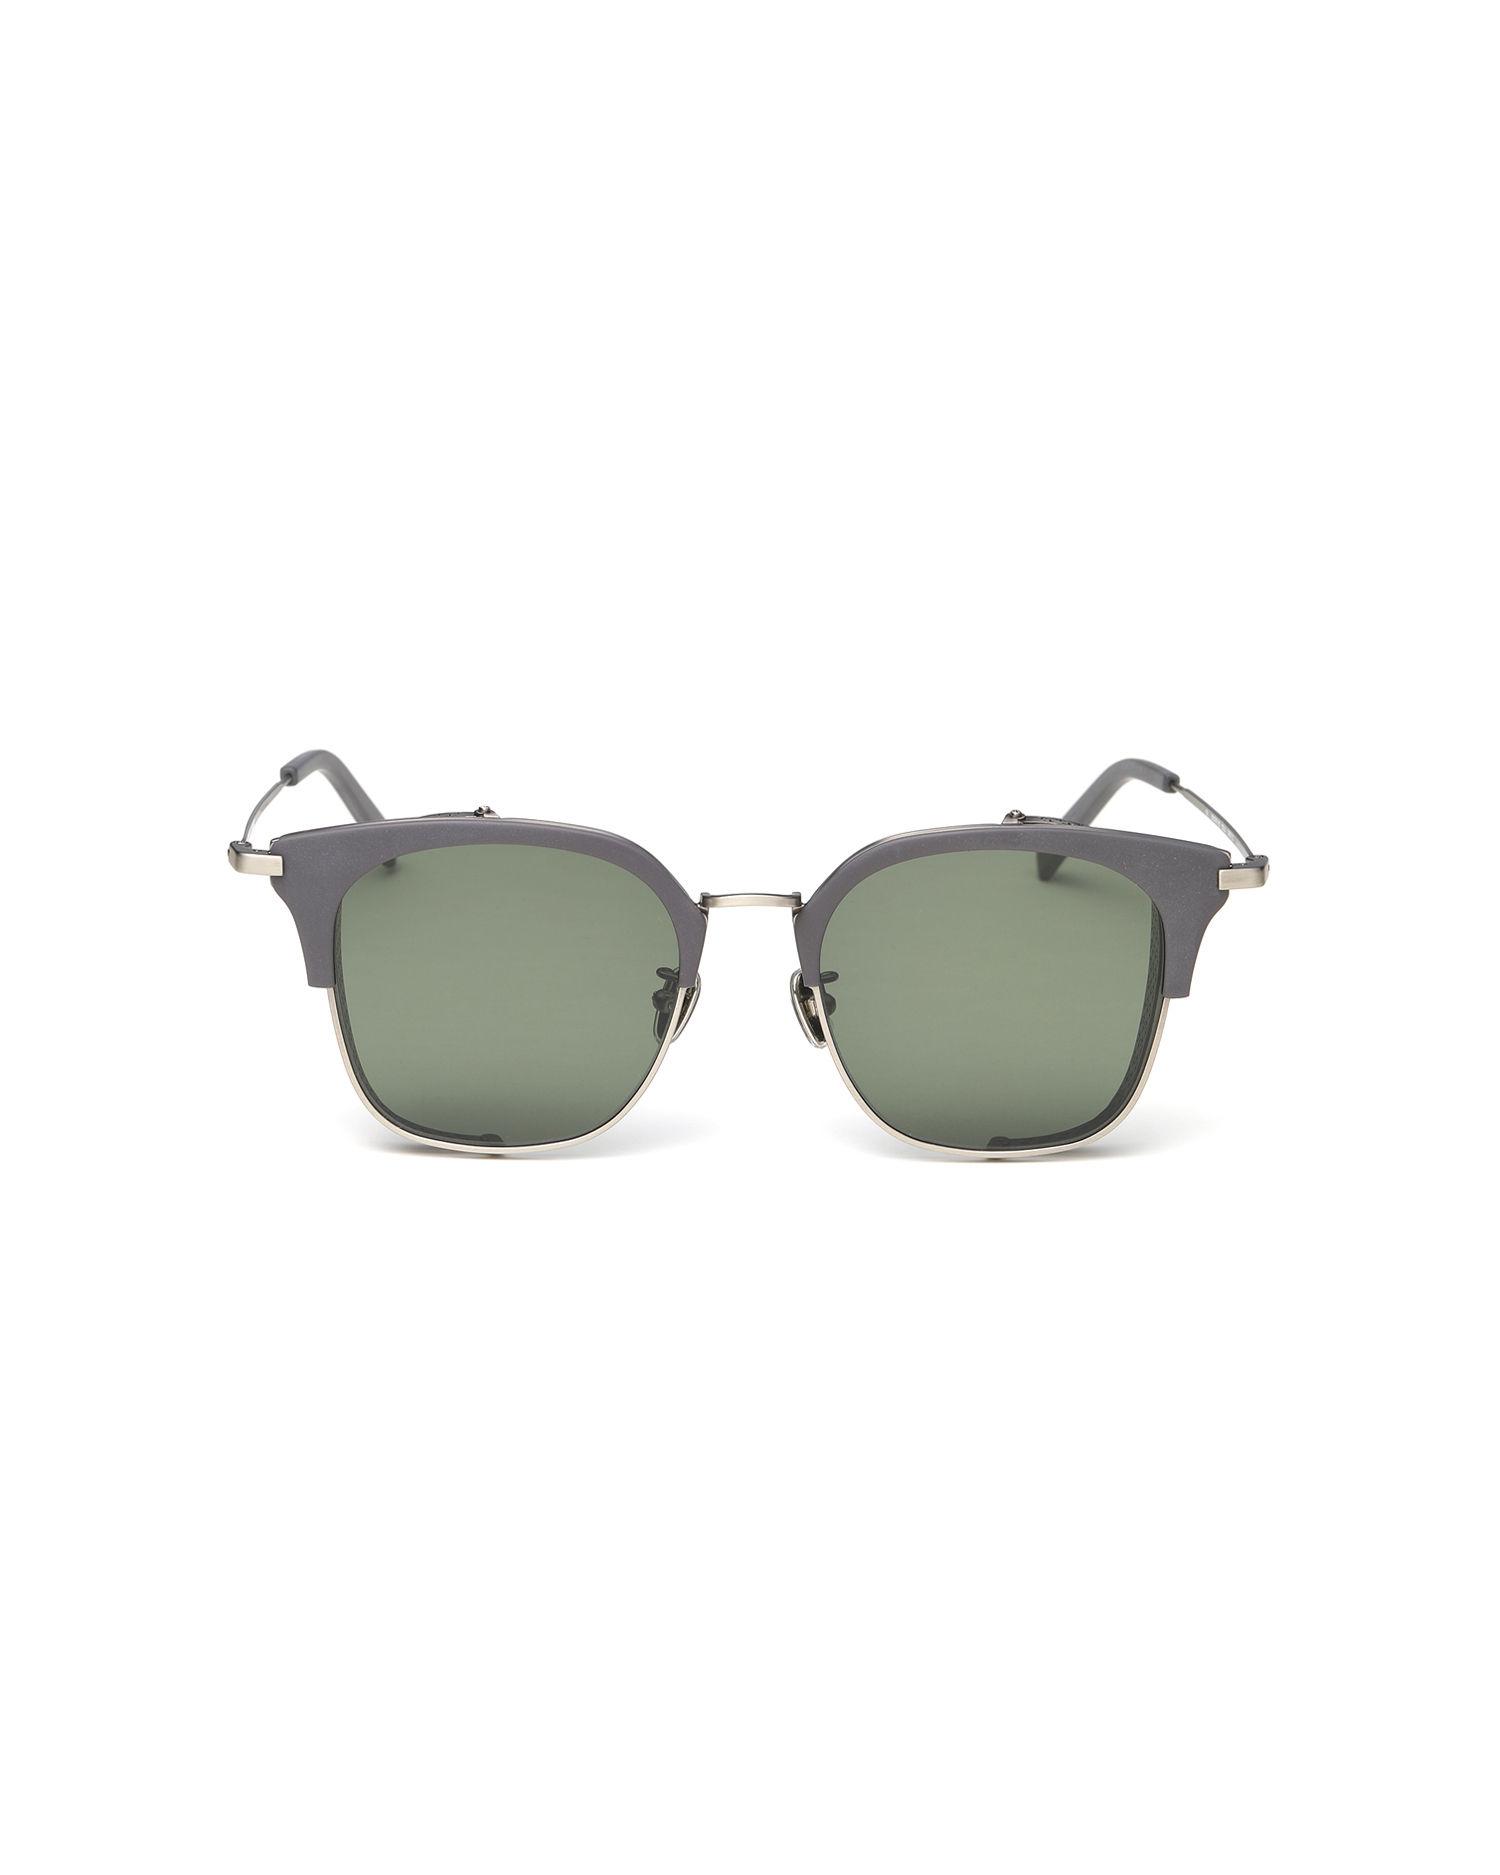 Clubmaster sunglasses by 4ARMY